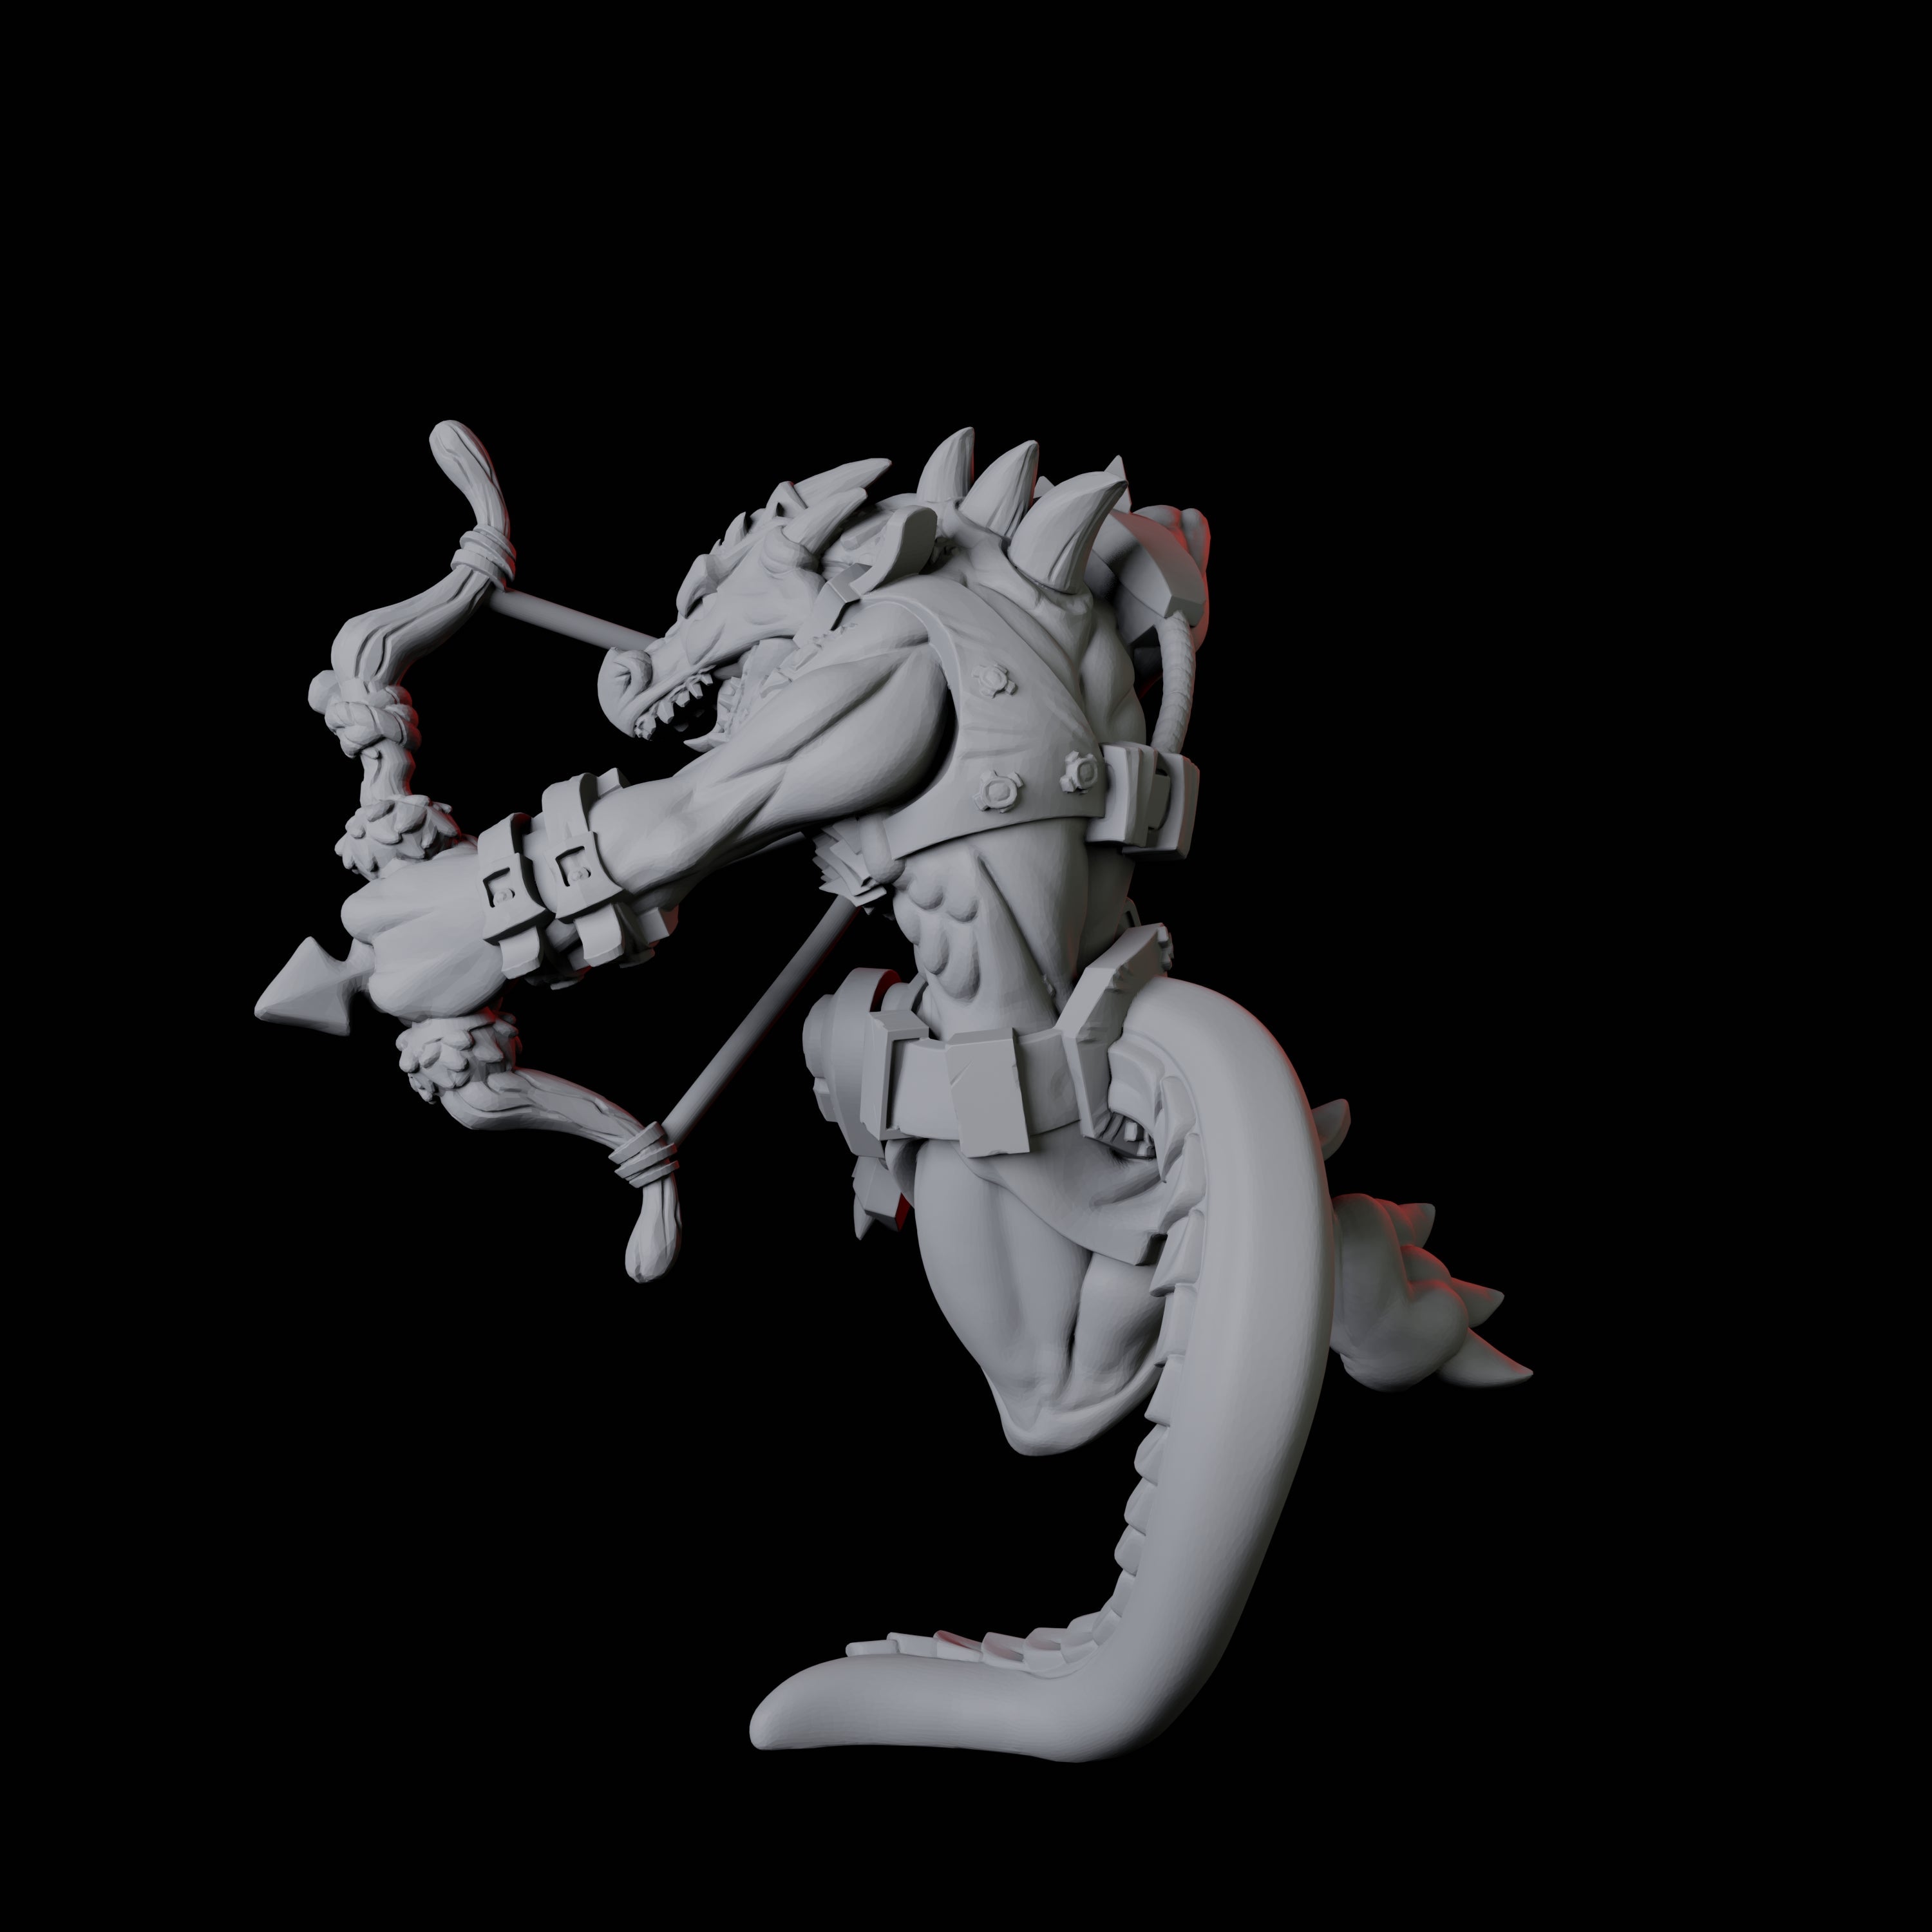 Kobold Ranger C Miniature for Dungeons and Dragons, Pathfinder or other TTRPGs